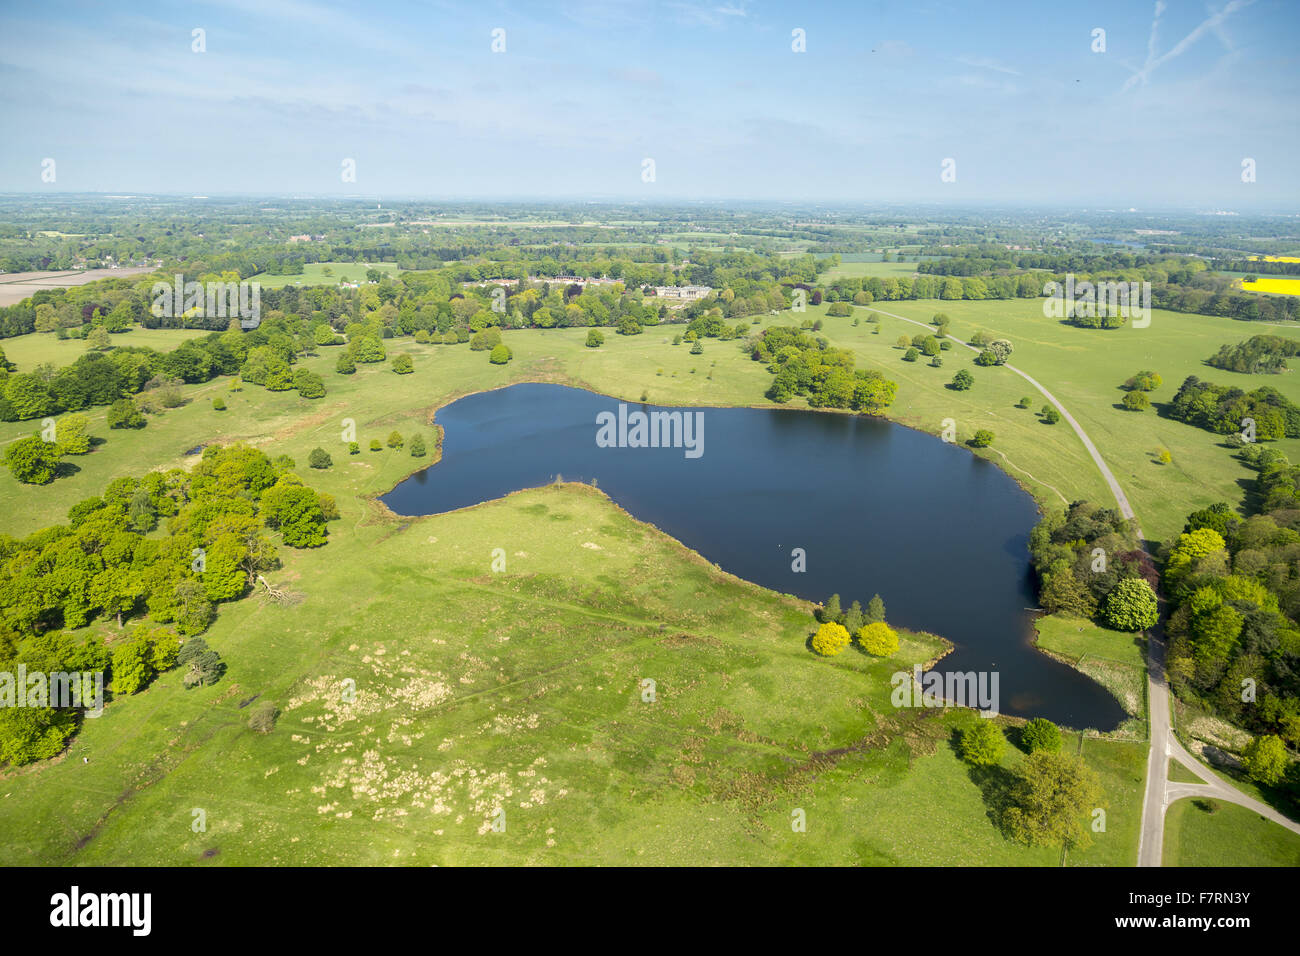 An aerial view of Tatton Park, Cheshire. The early 19th century Wyatt house sits amid a 400 hectare deer park. Stock Photo